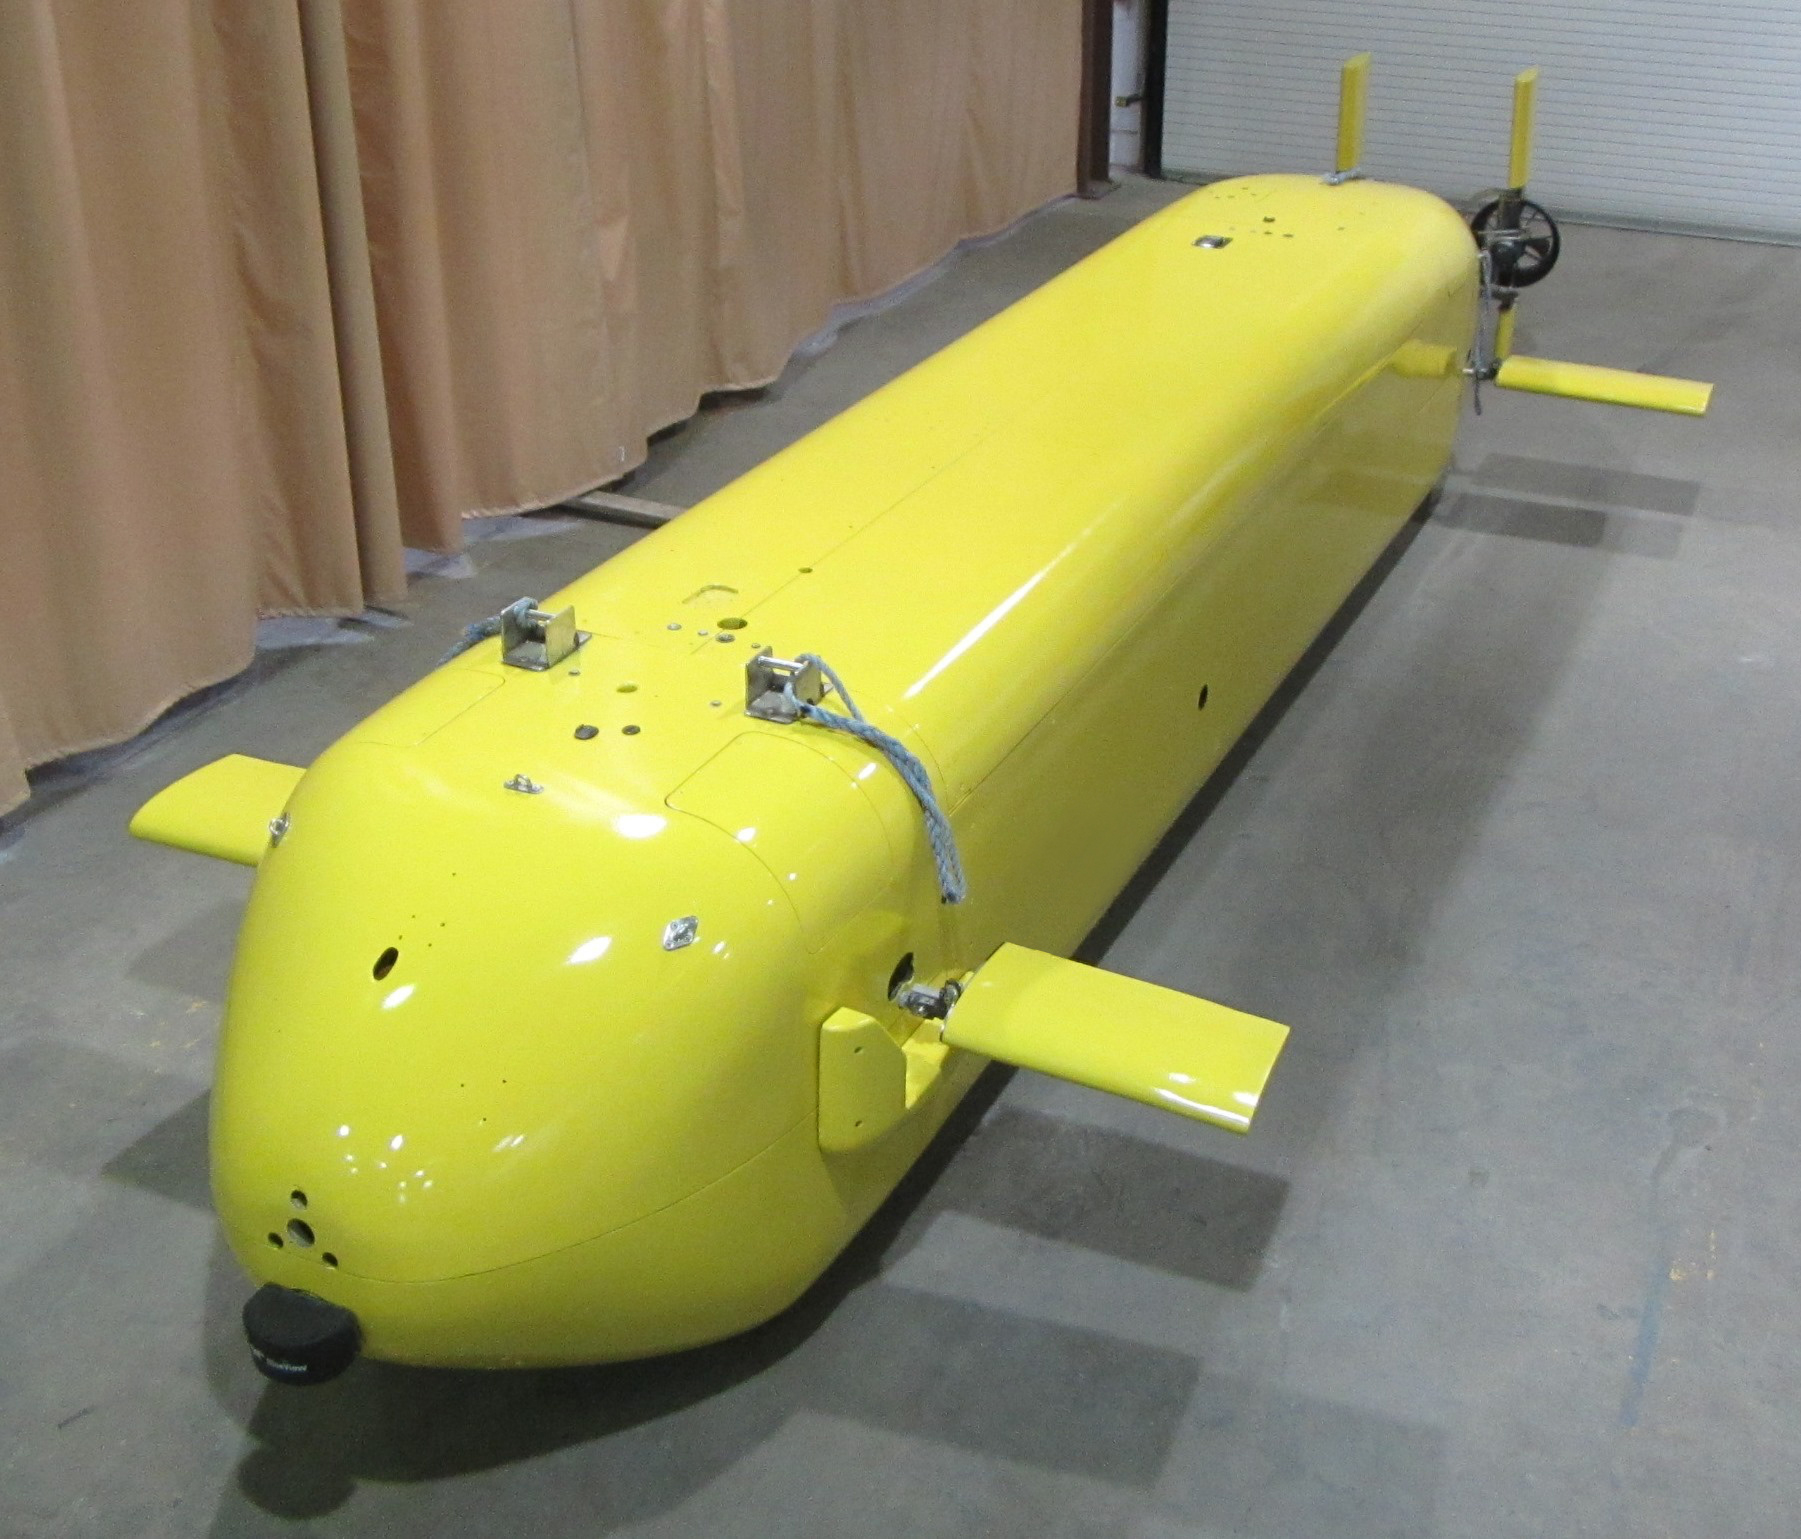 ARLINGTON, Va. (April 7, 2015): First publicly released photo of ONR's Large Displacement Unmanned Underwater Vehicle - Innovative Naval Prototype (LDUUV-INP).  The LDUUV-INP technologies will develop enhanced capabilities in endurance, energy, and autonomy.  (Photo credit Office of Naval Research/Released)